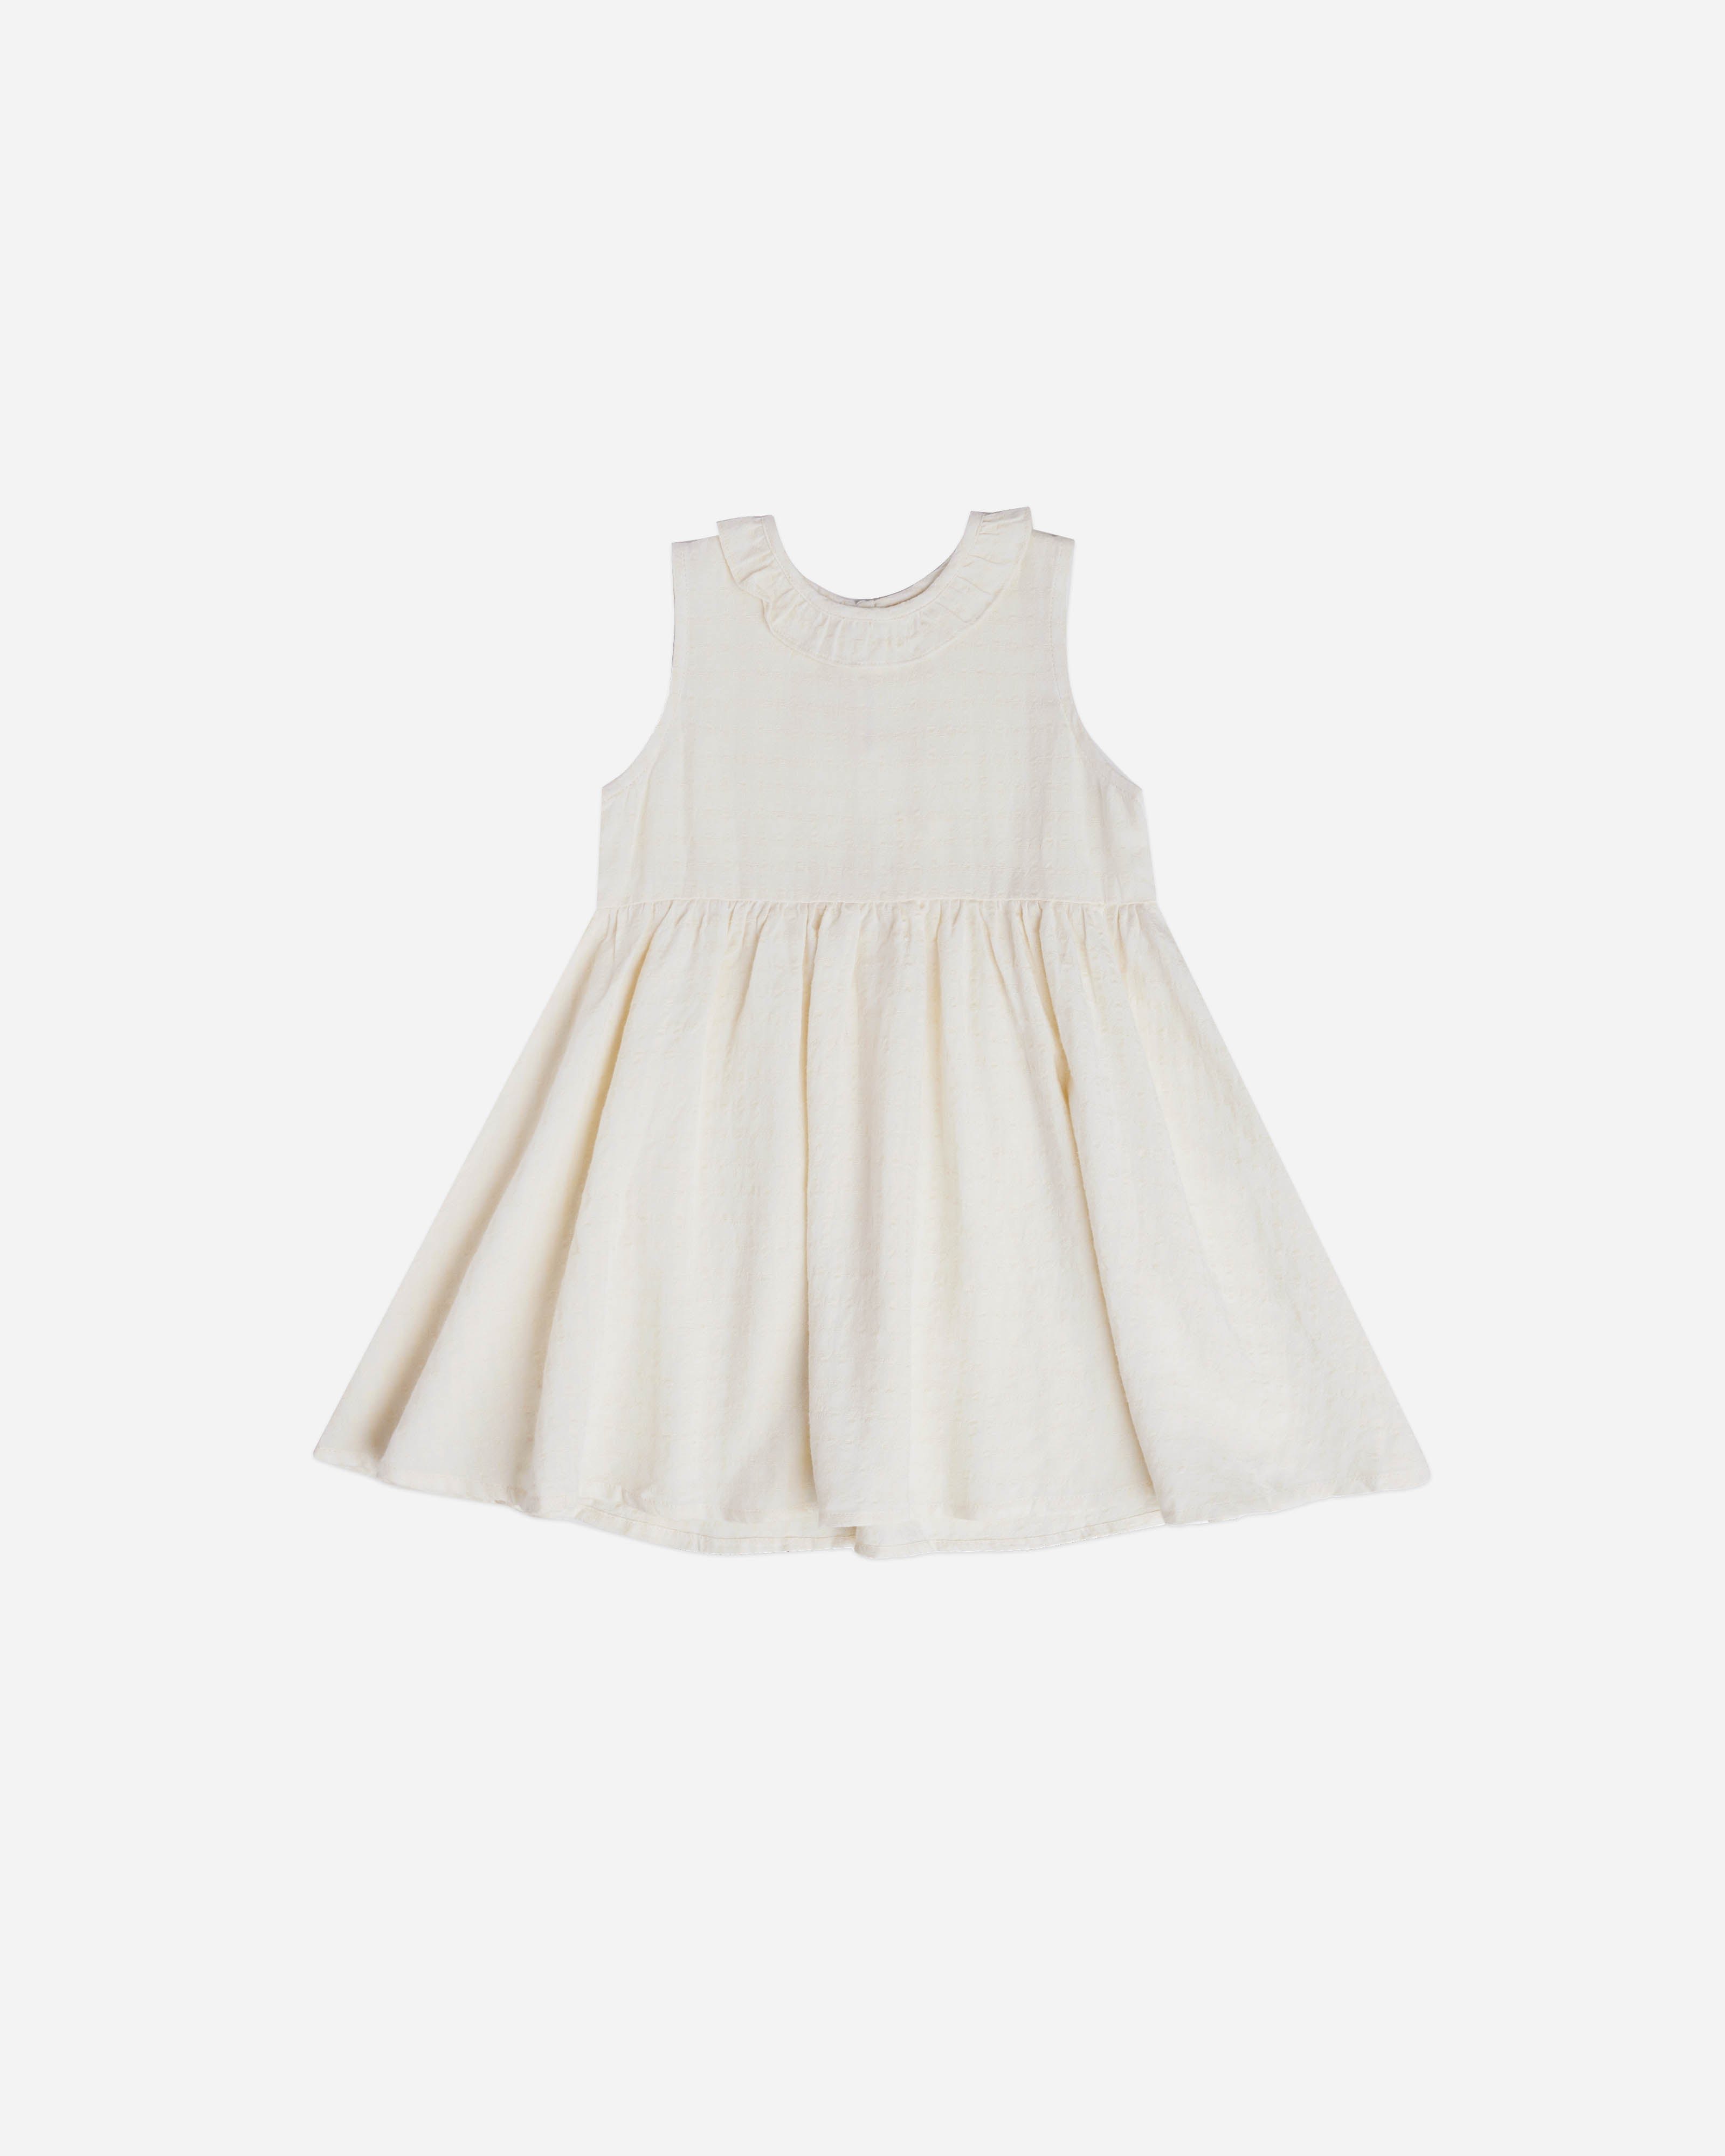 marie dress || ivory - Rylee + Cru | Kids Clothes | Trendy Baby Clothes | Modern Infant Outfits |